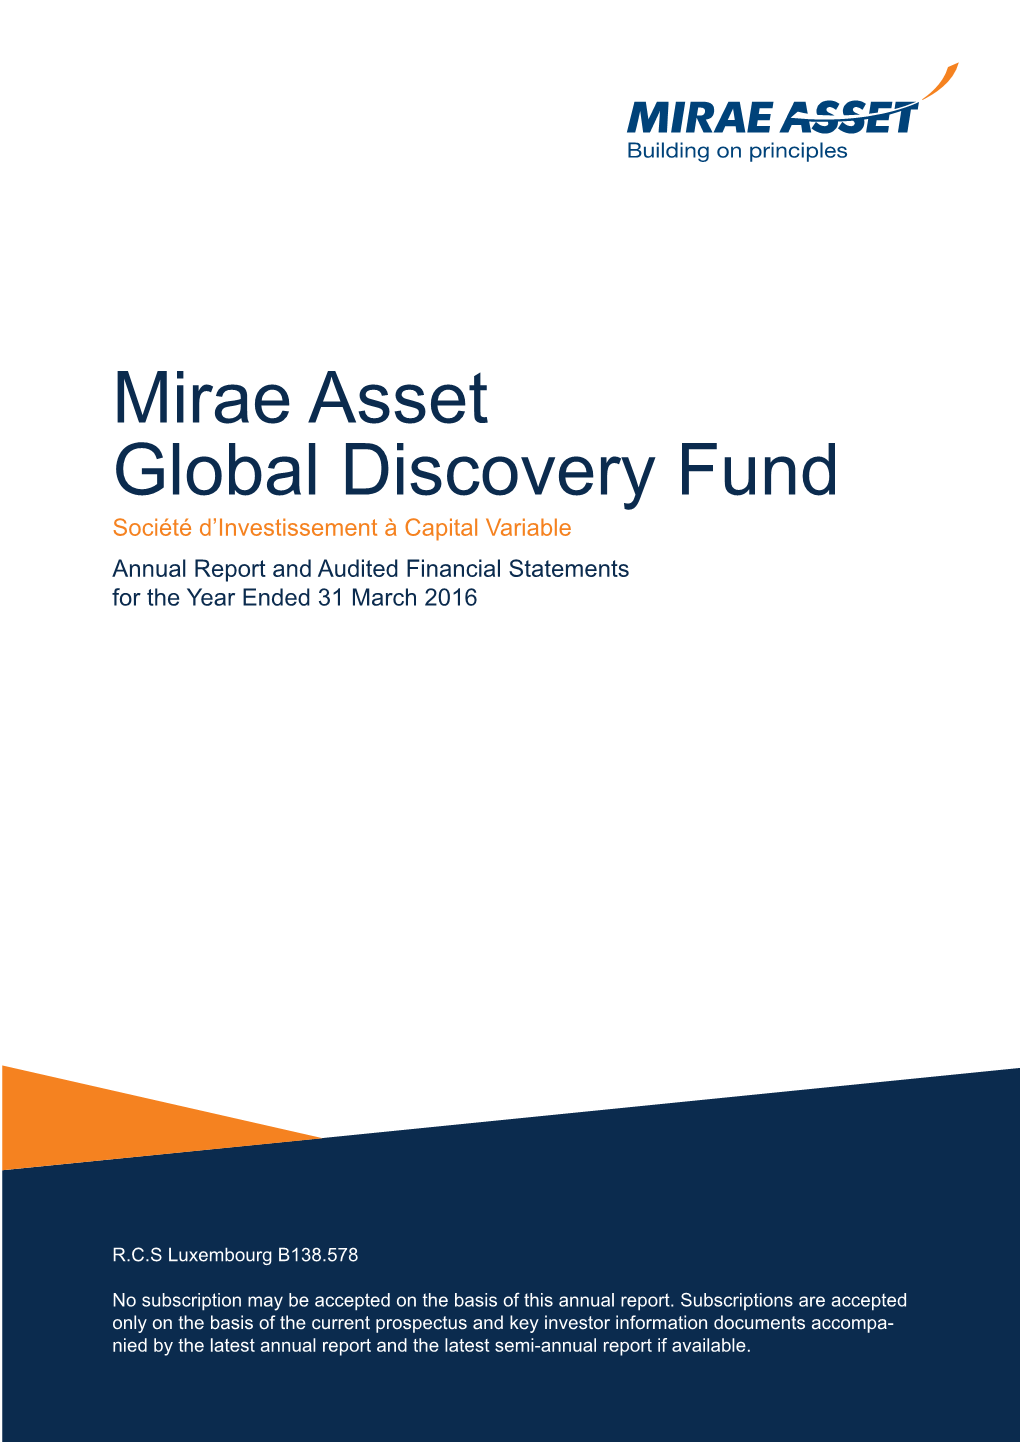 Mirae Asset Global Discovery Fund Société D’Investissement À Capital Variable Annual Report and Audited Financial Statements for the Year Ended 31 March 2016